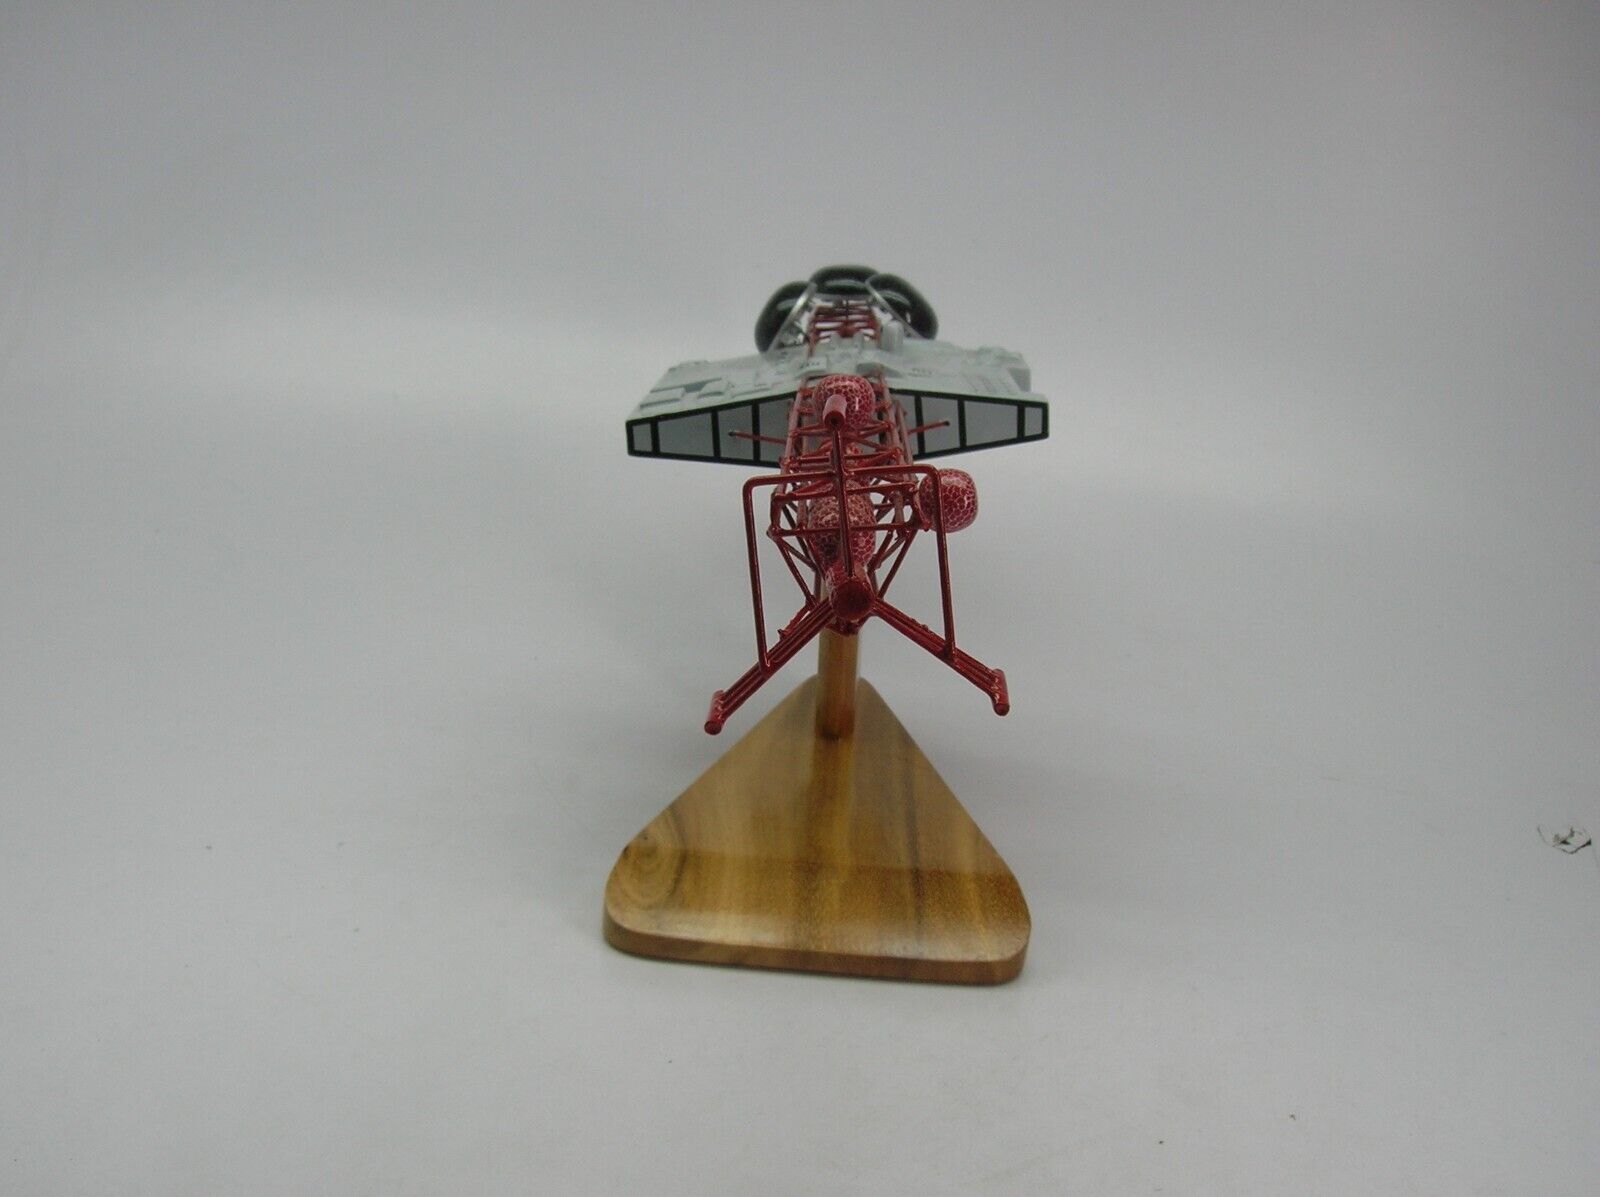 Valley Forge Silent Running Spaceship Desktop Wood Model Small New             